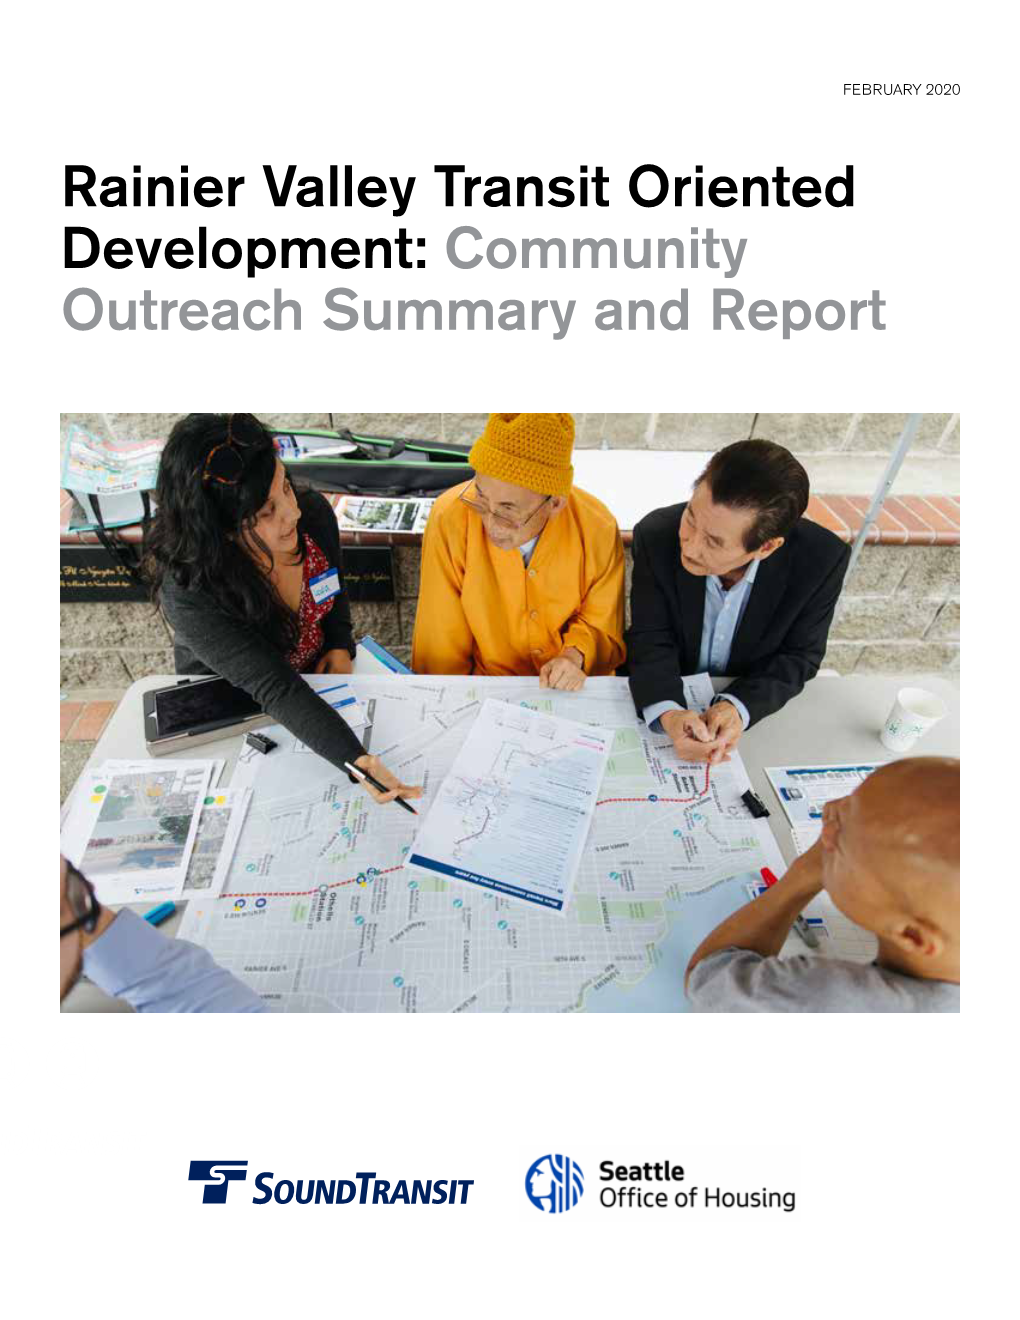 Rainier Valley Transit Oriented Development: Community Outreach Summary and Report